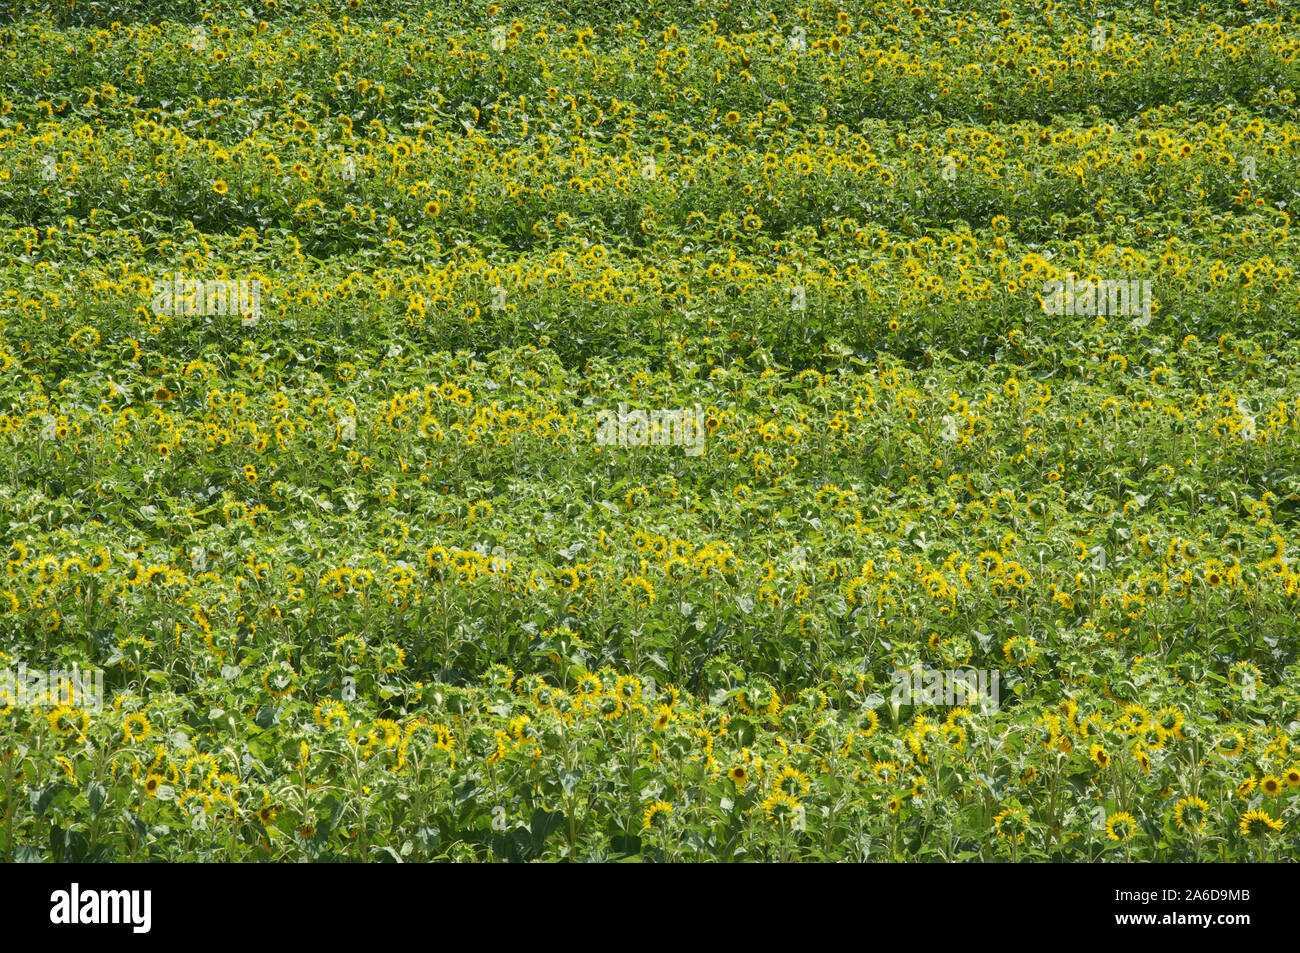 Summertime in the French countryside. A field of Sunflowers, Helianthus Anuus, fill the scene in the Vercors region of La Drôme. South east France. Stock Photo